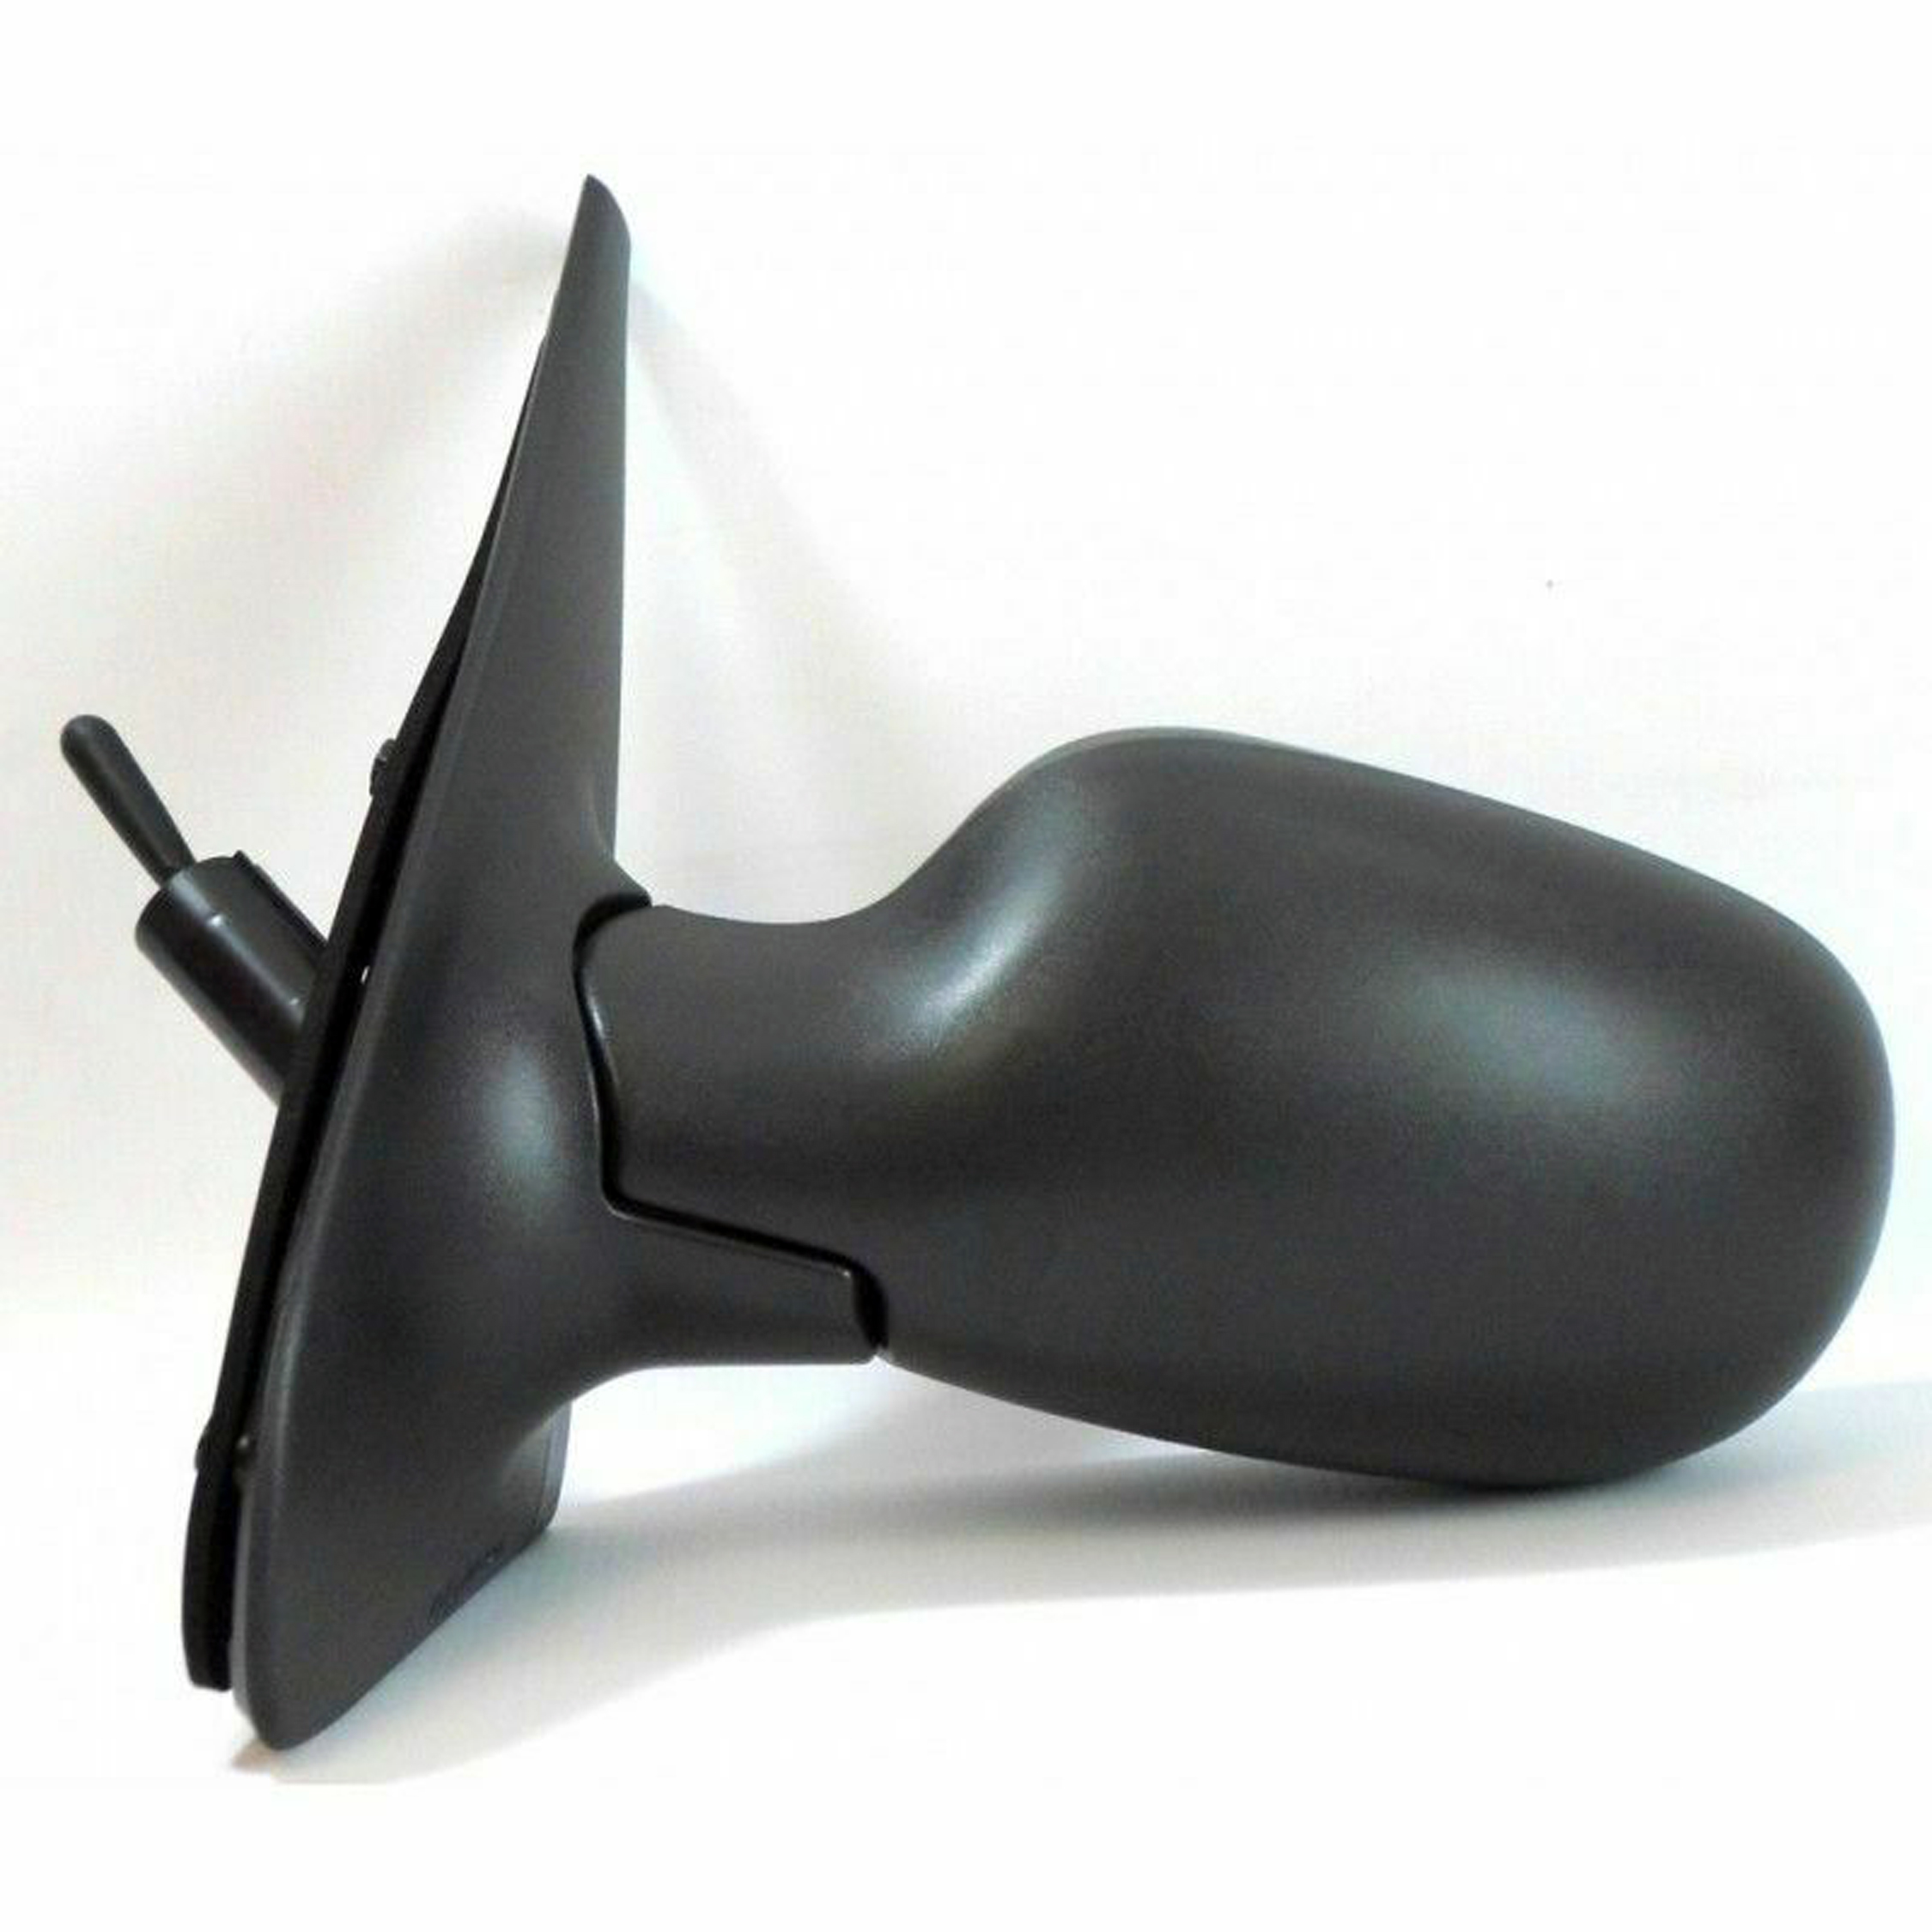 Renault Clio Complete Wing Mirror Unit LEFT HAND ( UK Passenger Side ) 1998 to 2009 [ MK II ] – MANUAL Wing Mirror Unit